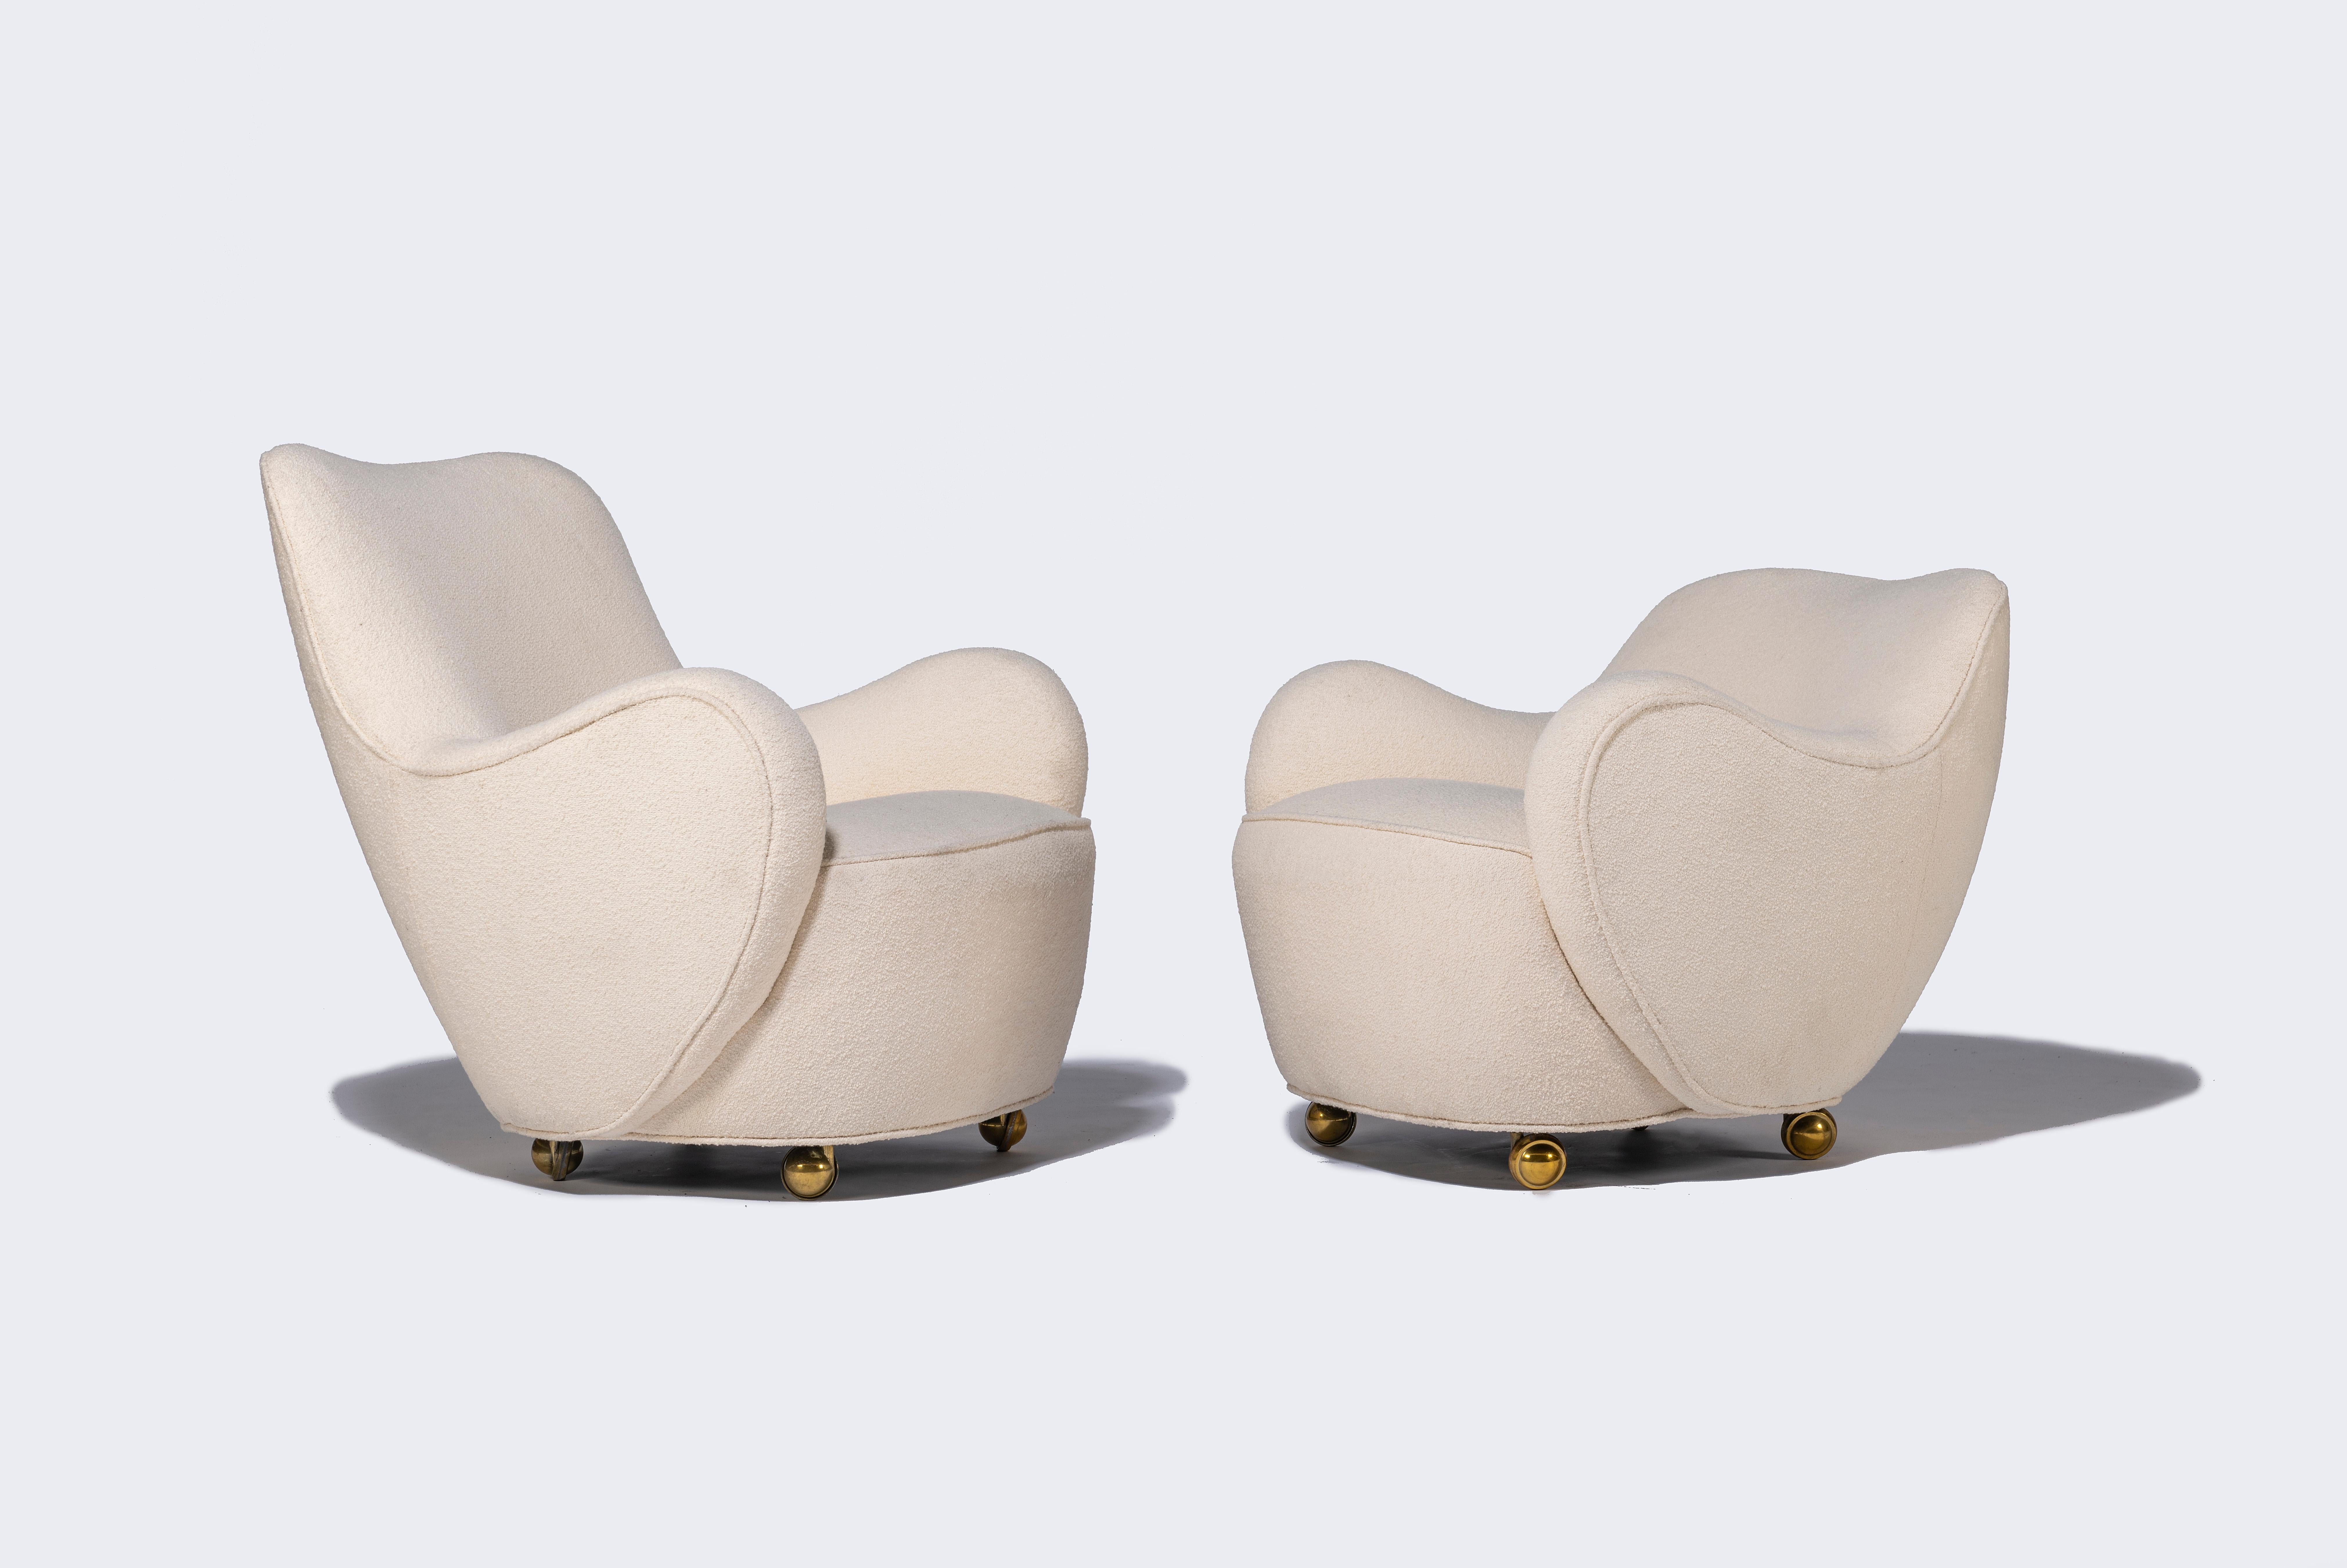 A rare pair early high and low backed fireside lounge chairs by Vladimir Kagan. Newly reupholstered.

Dimensions below are for high backed chair.

Low backed chair: 25